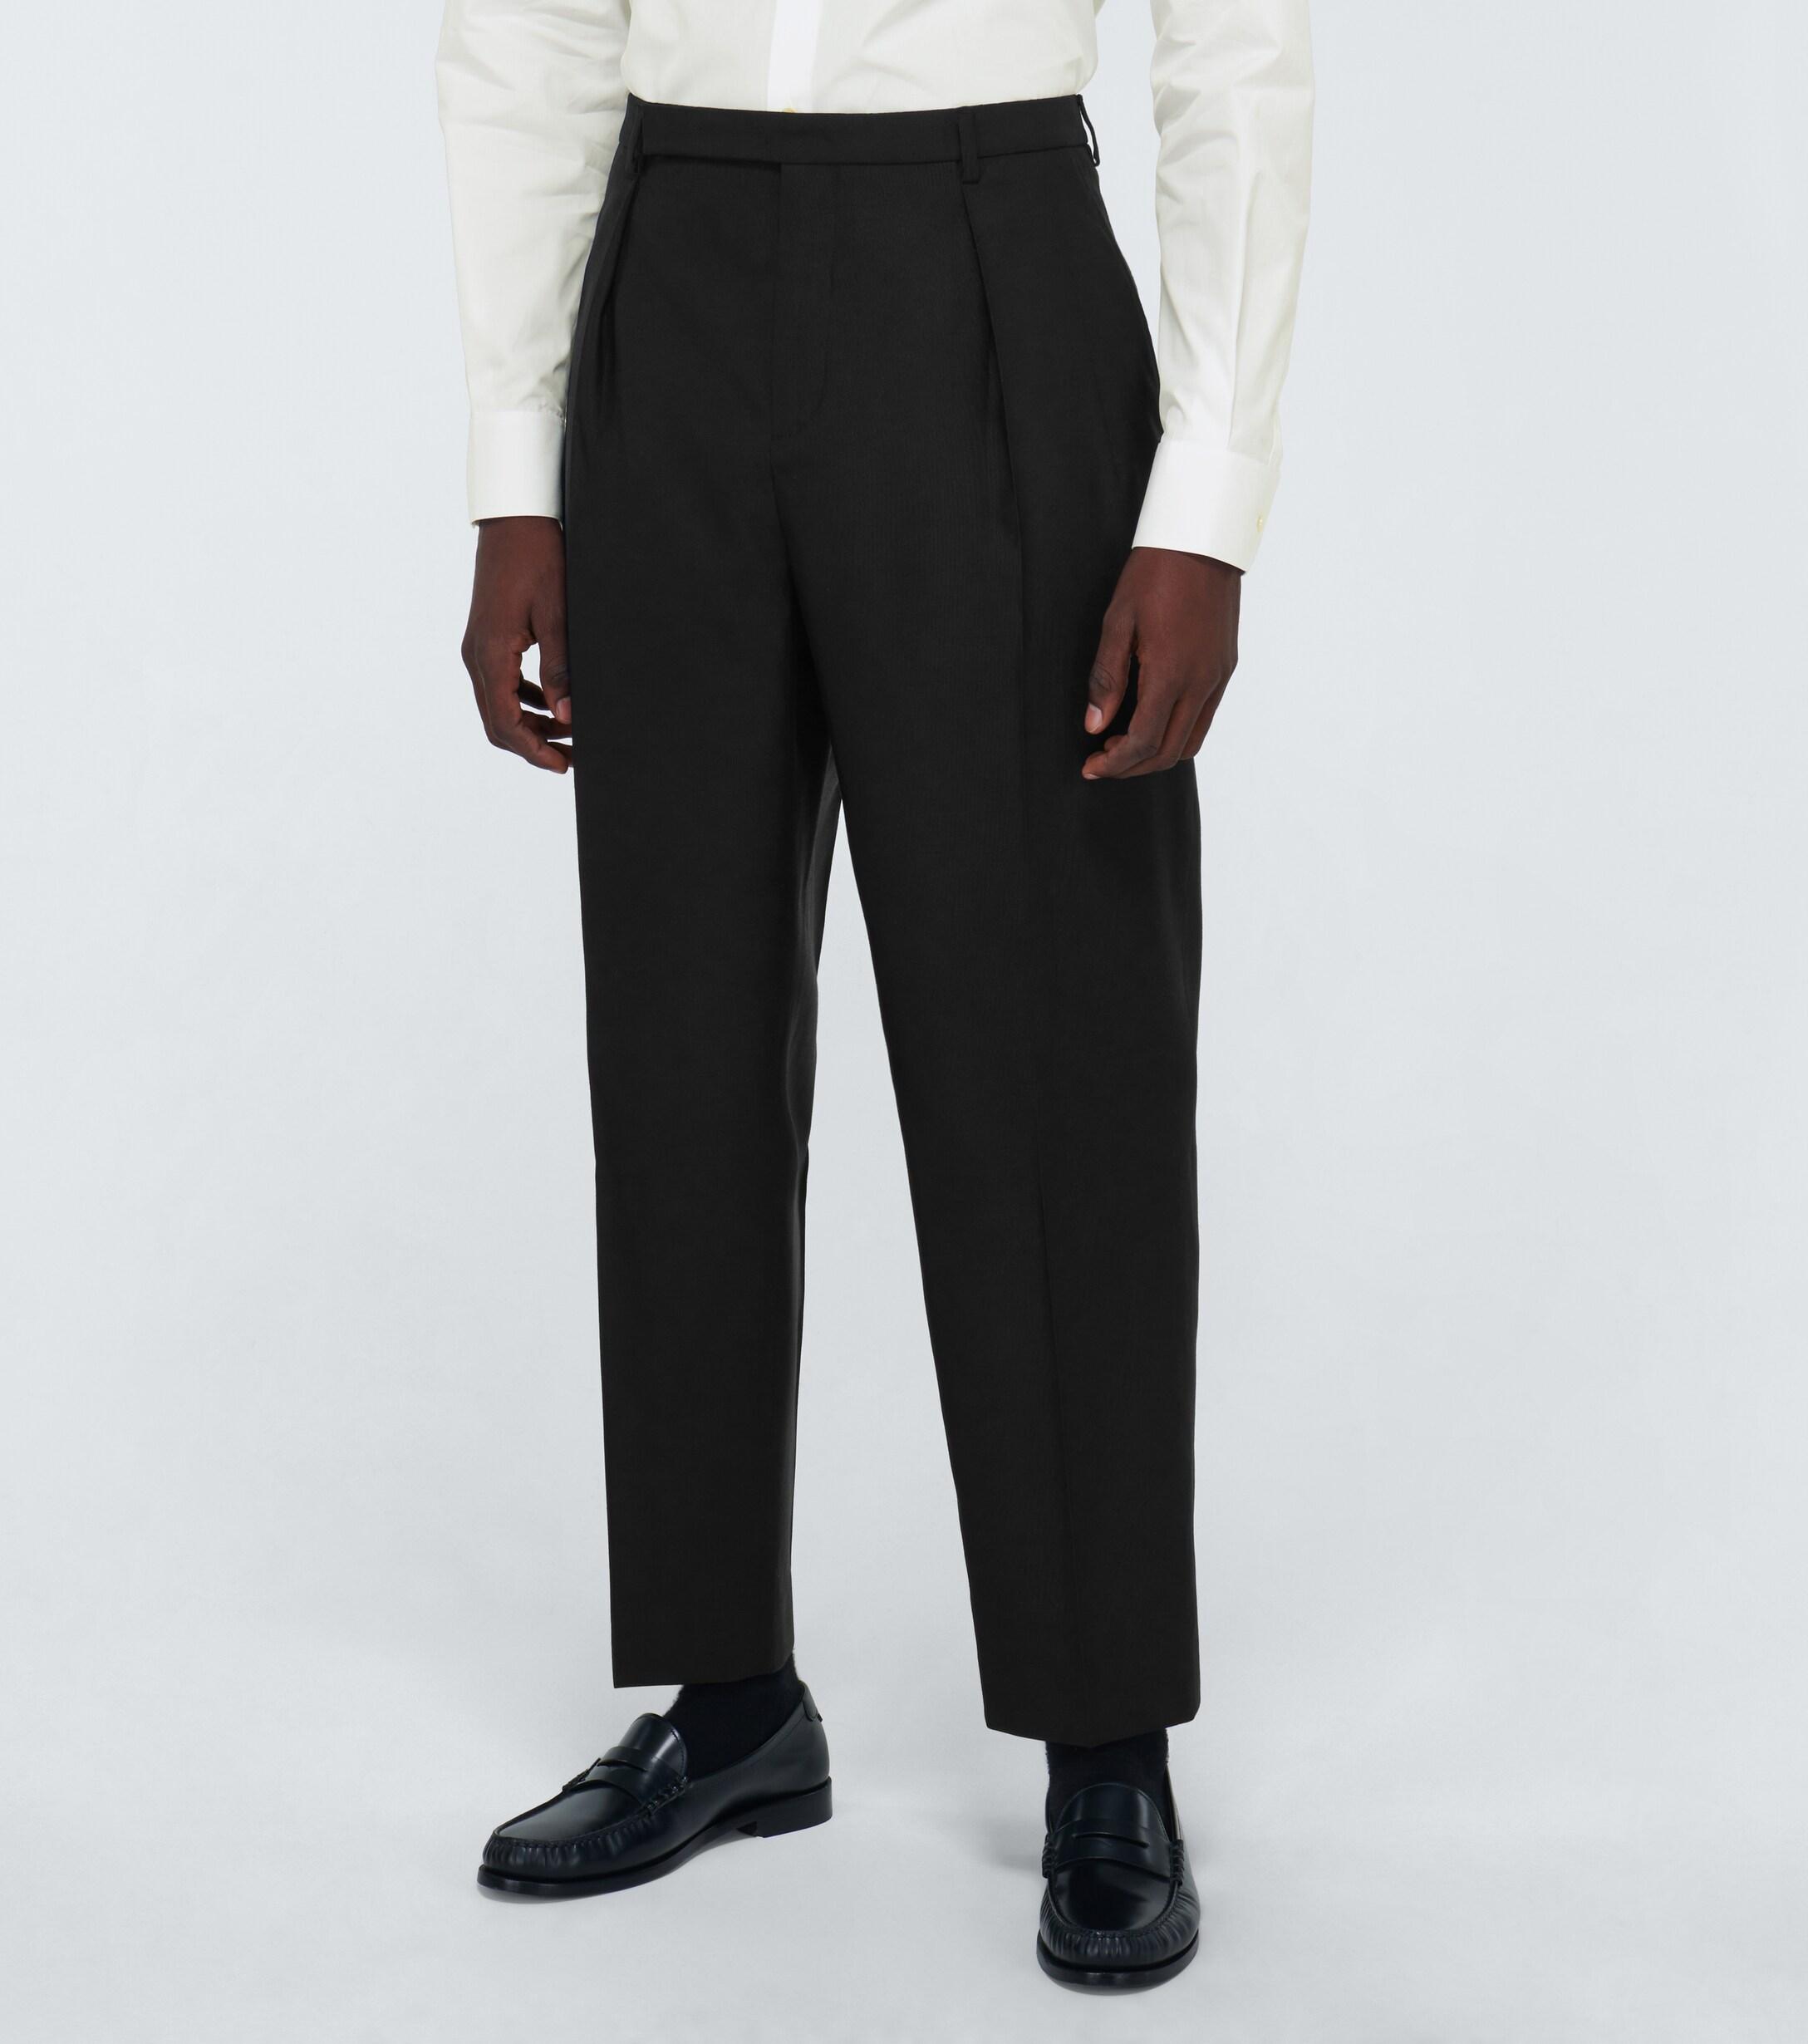 Saint Laurent Wool And Silk-blend Tailored Pants in Black for Men - Lyst